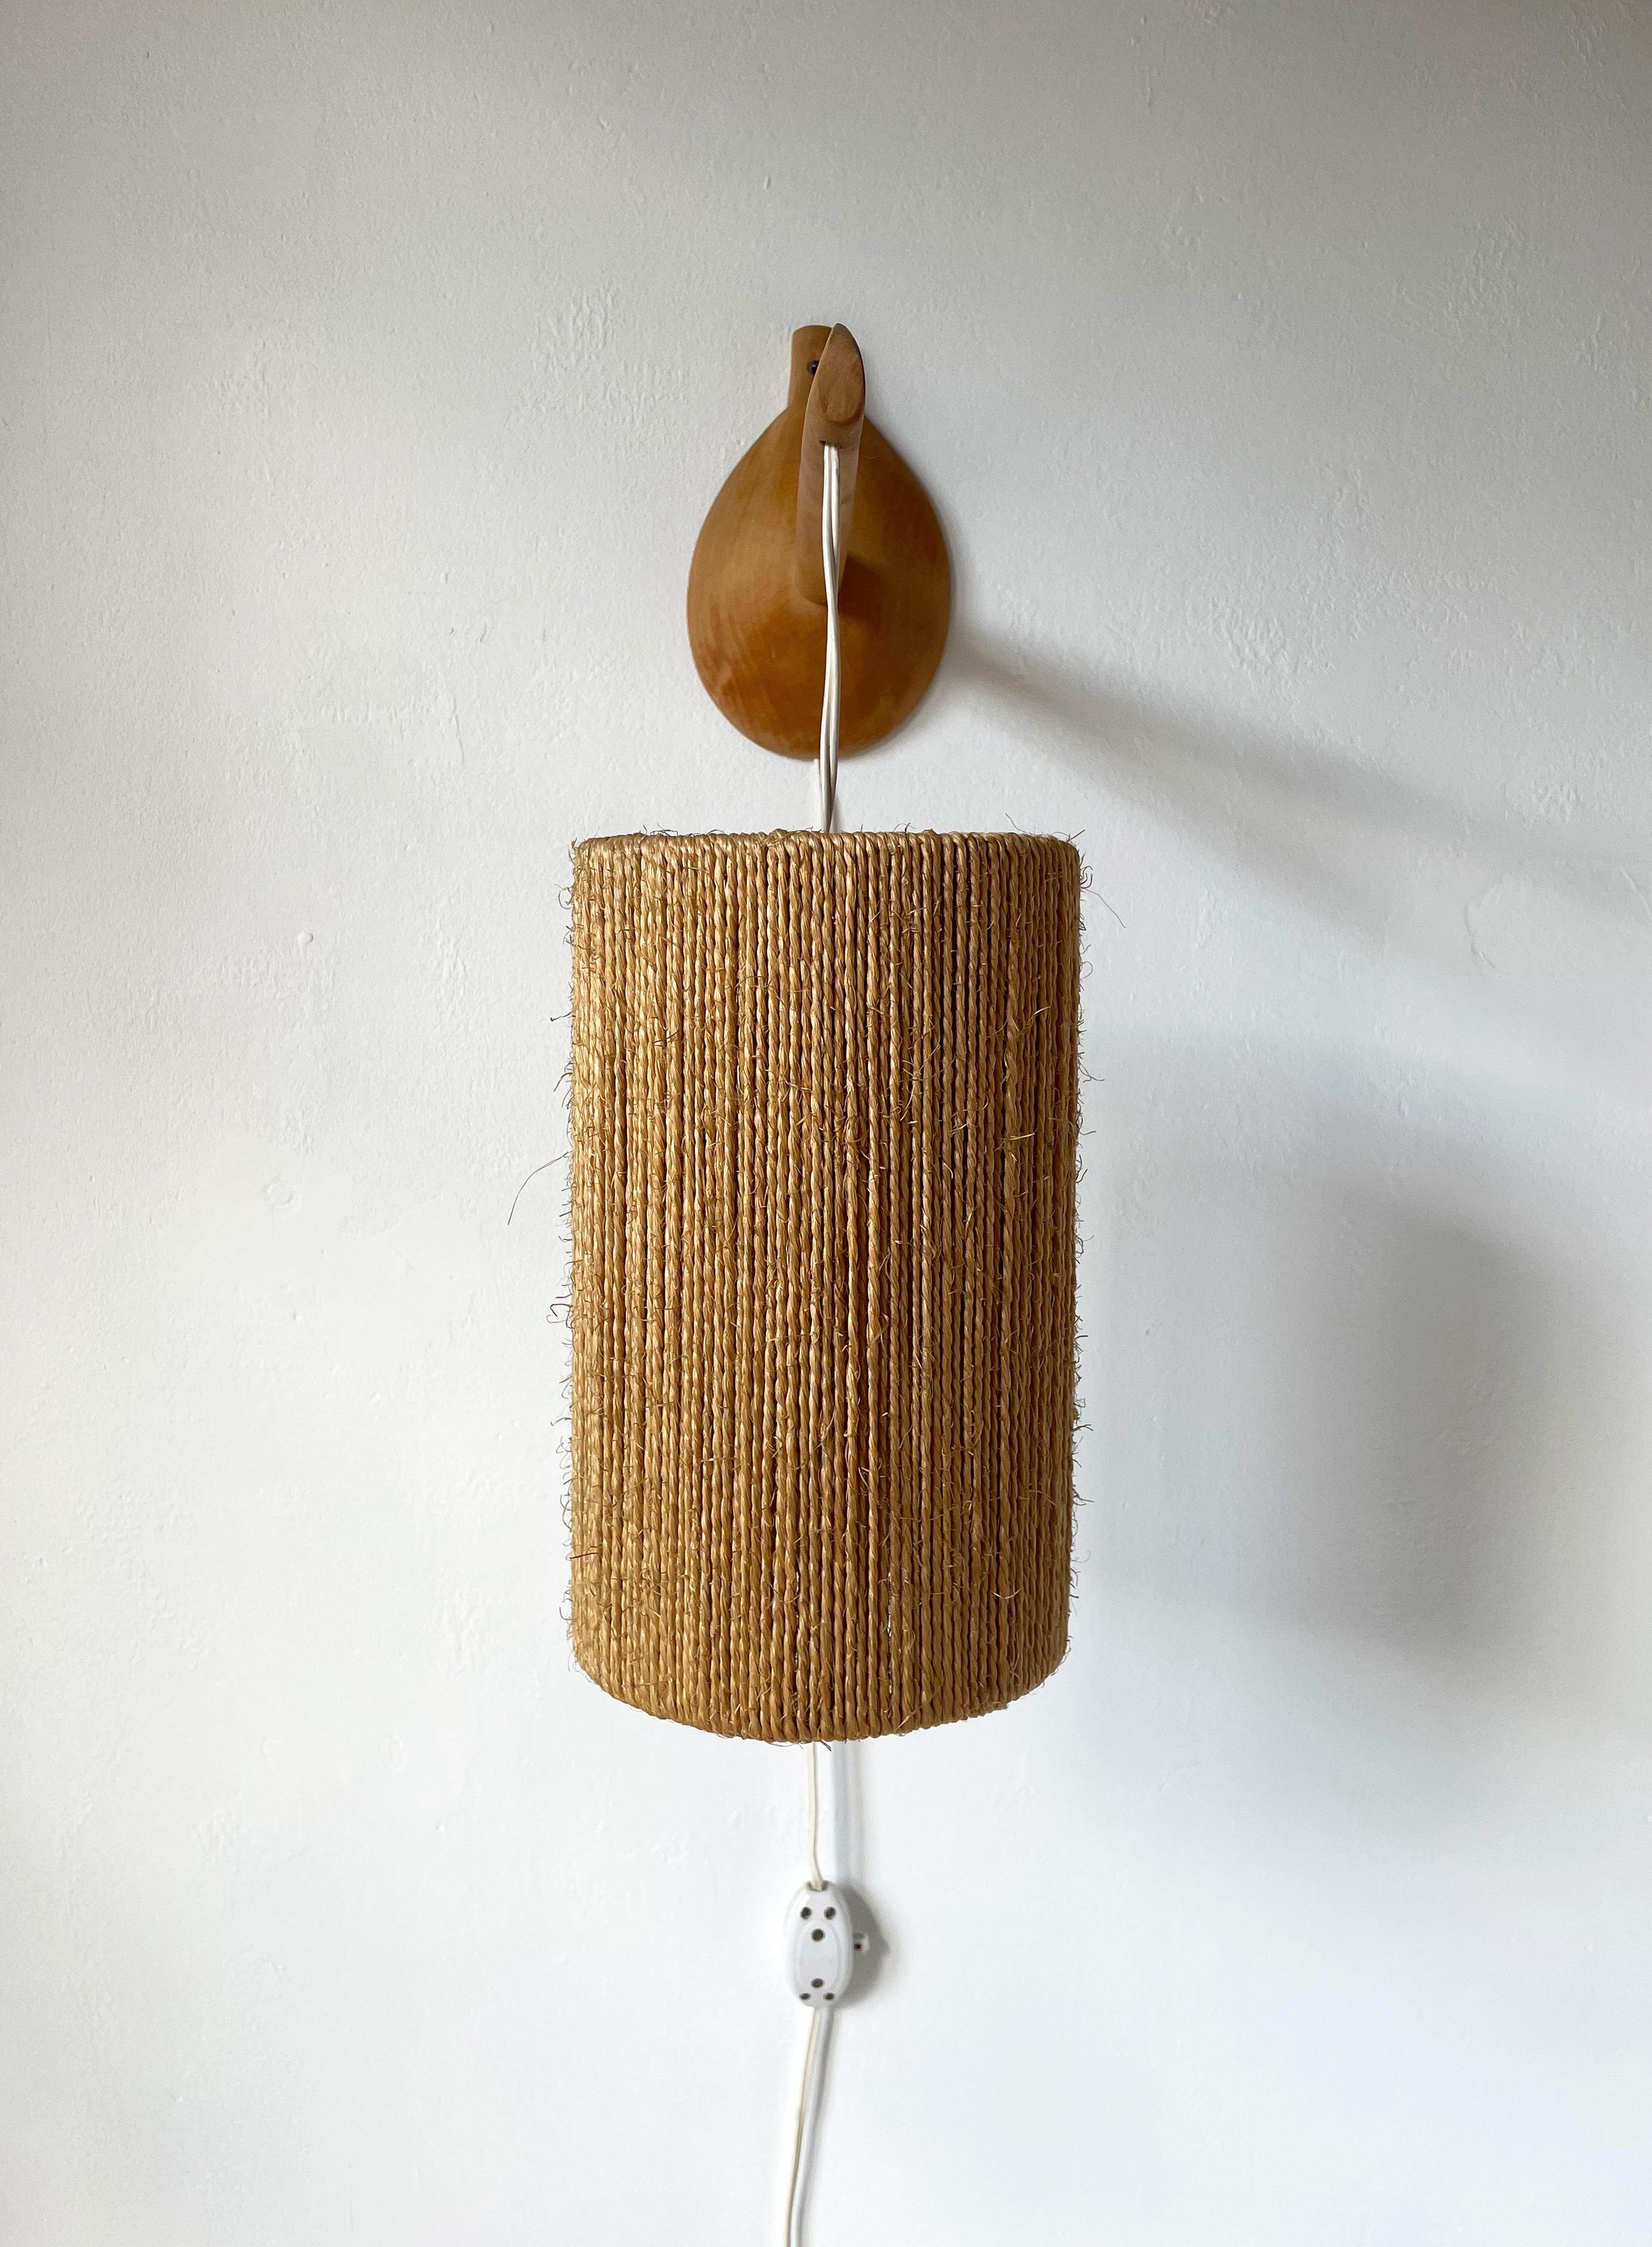 Mid-Century Modern Danish Modern Fog & Morup Style Papercord Wall Light, 1950s For Sale